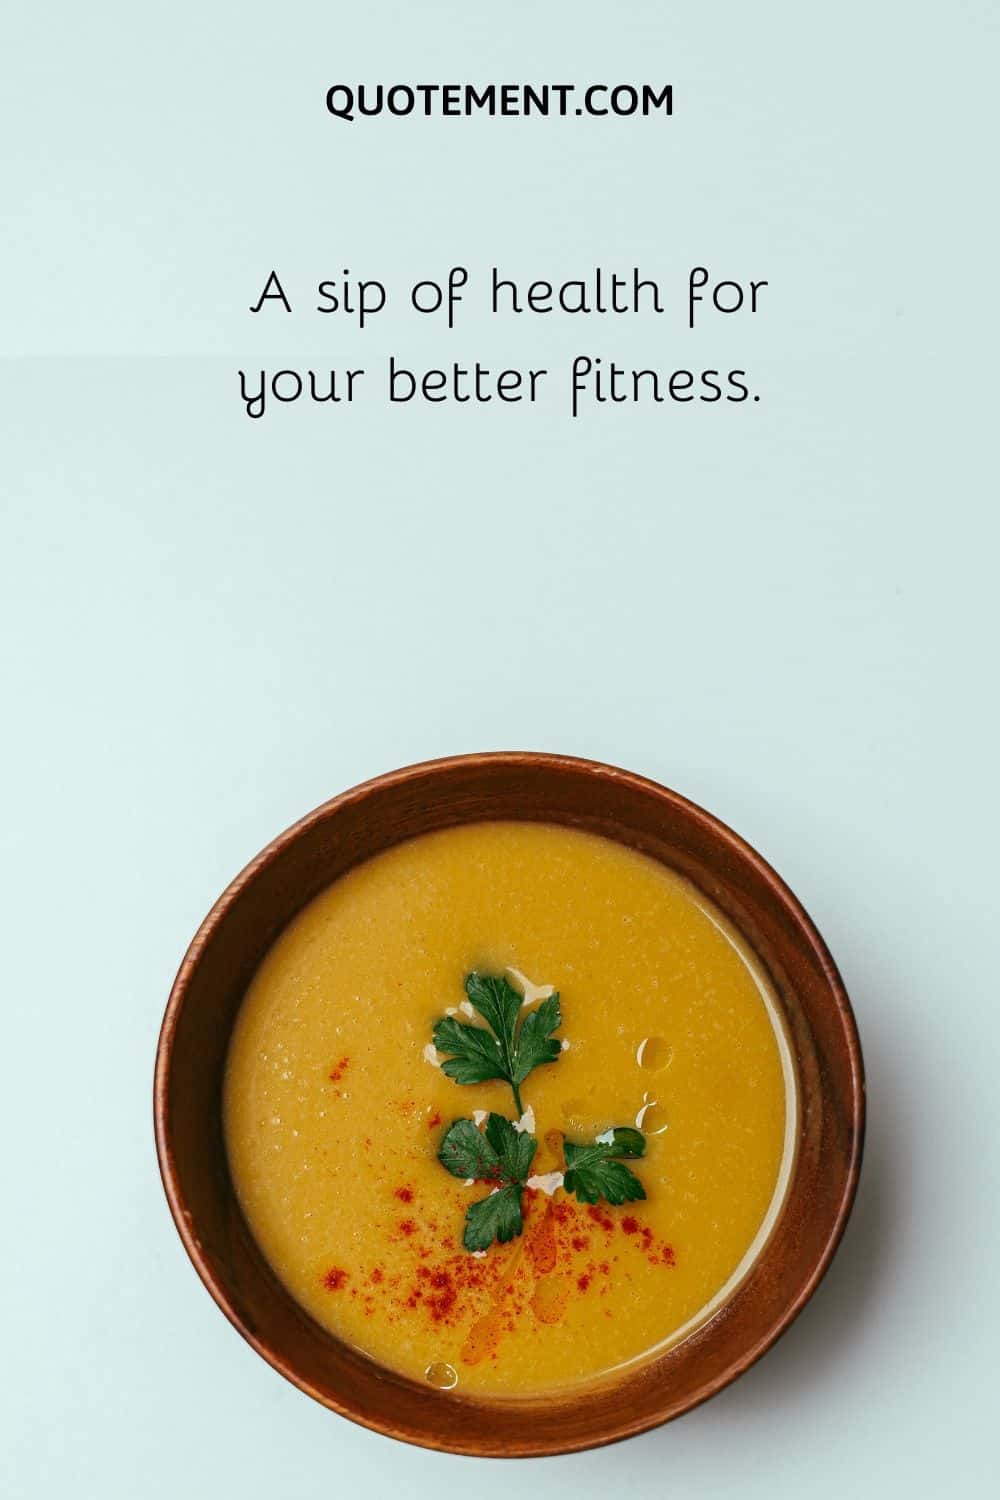 A sip of health for your better fitness